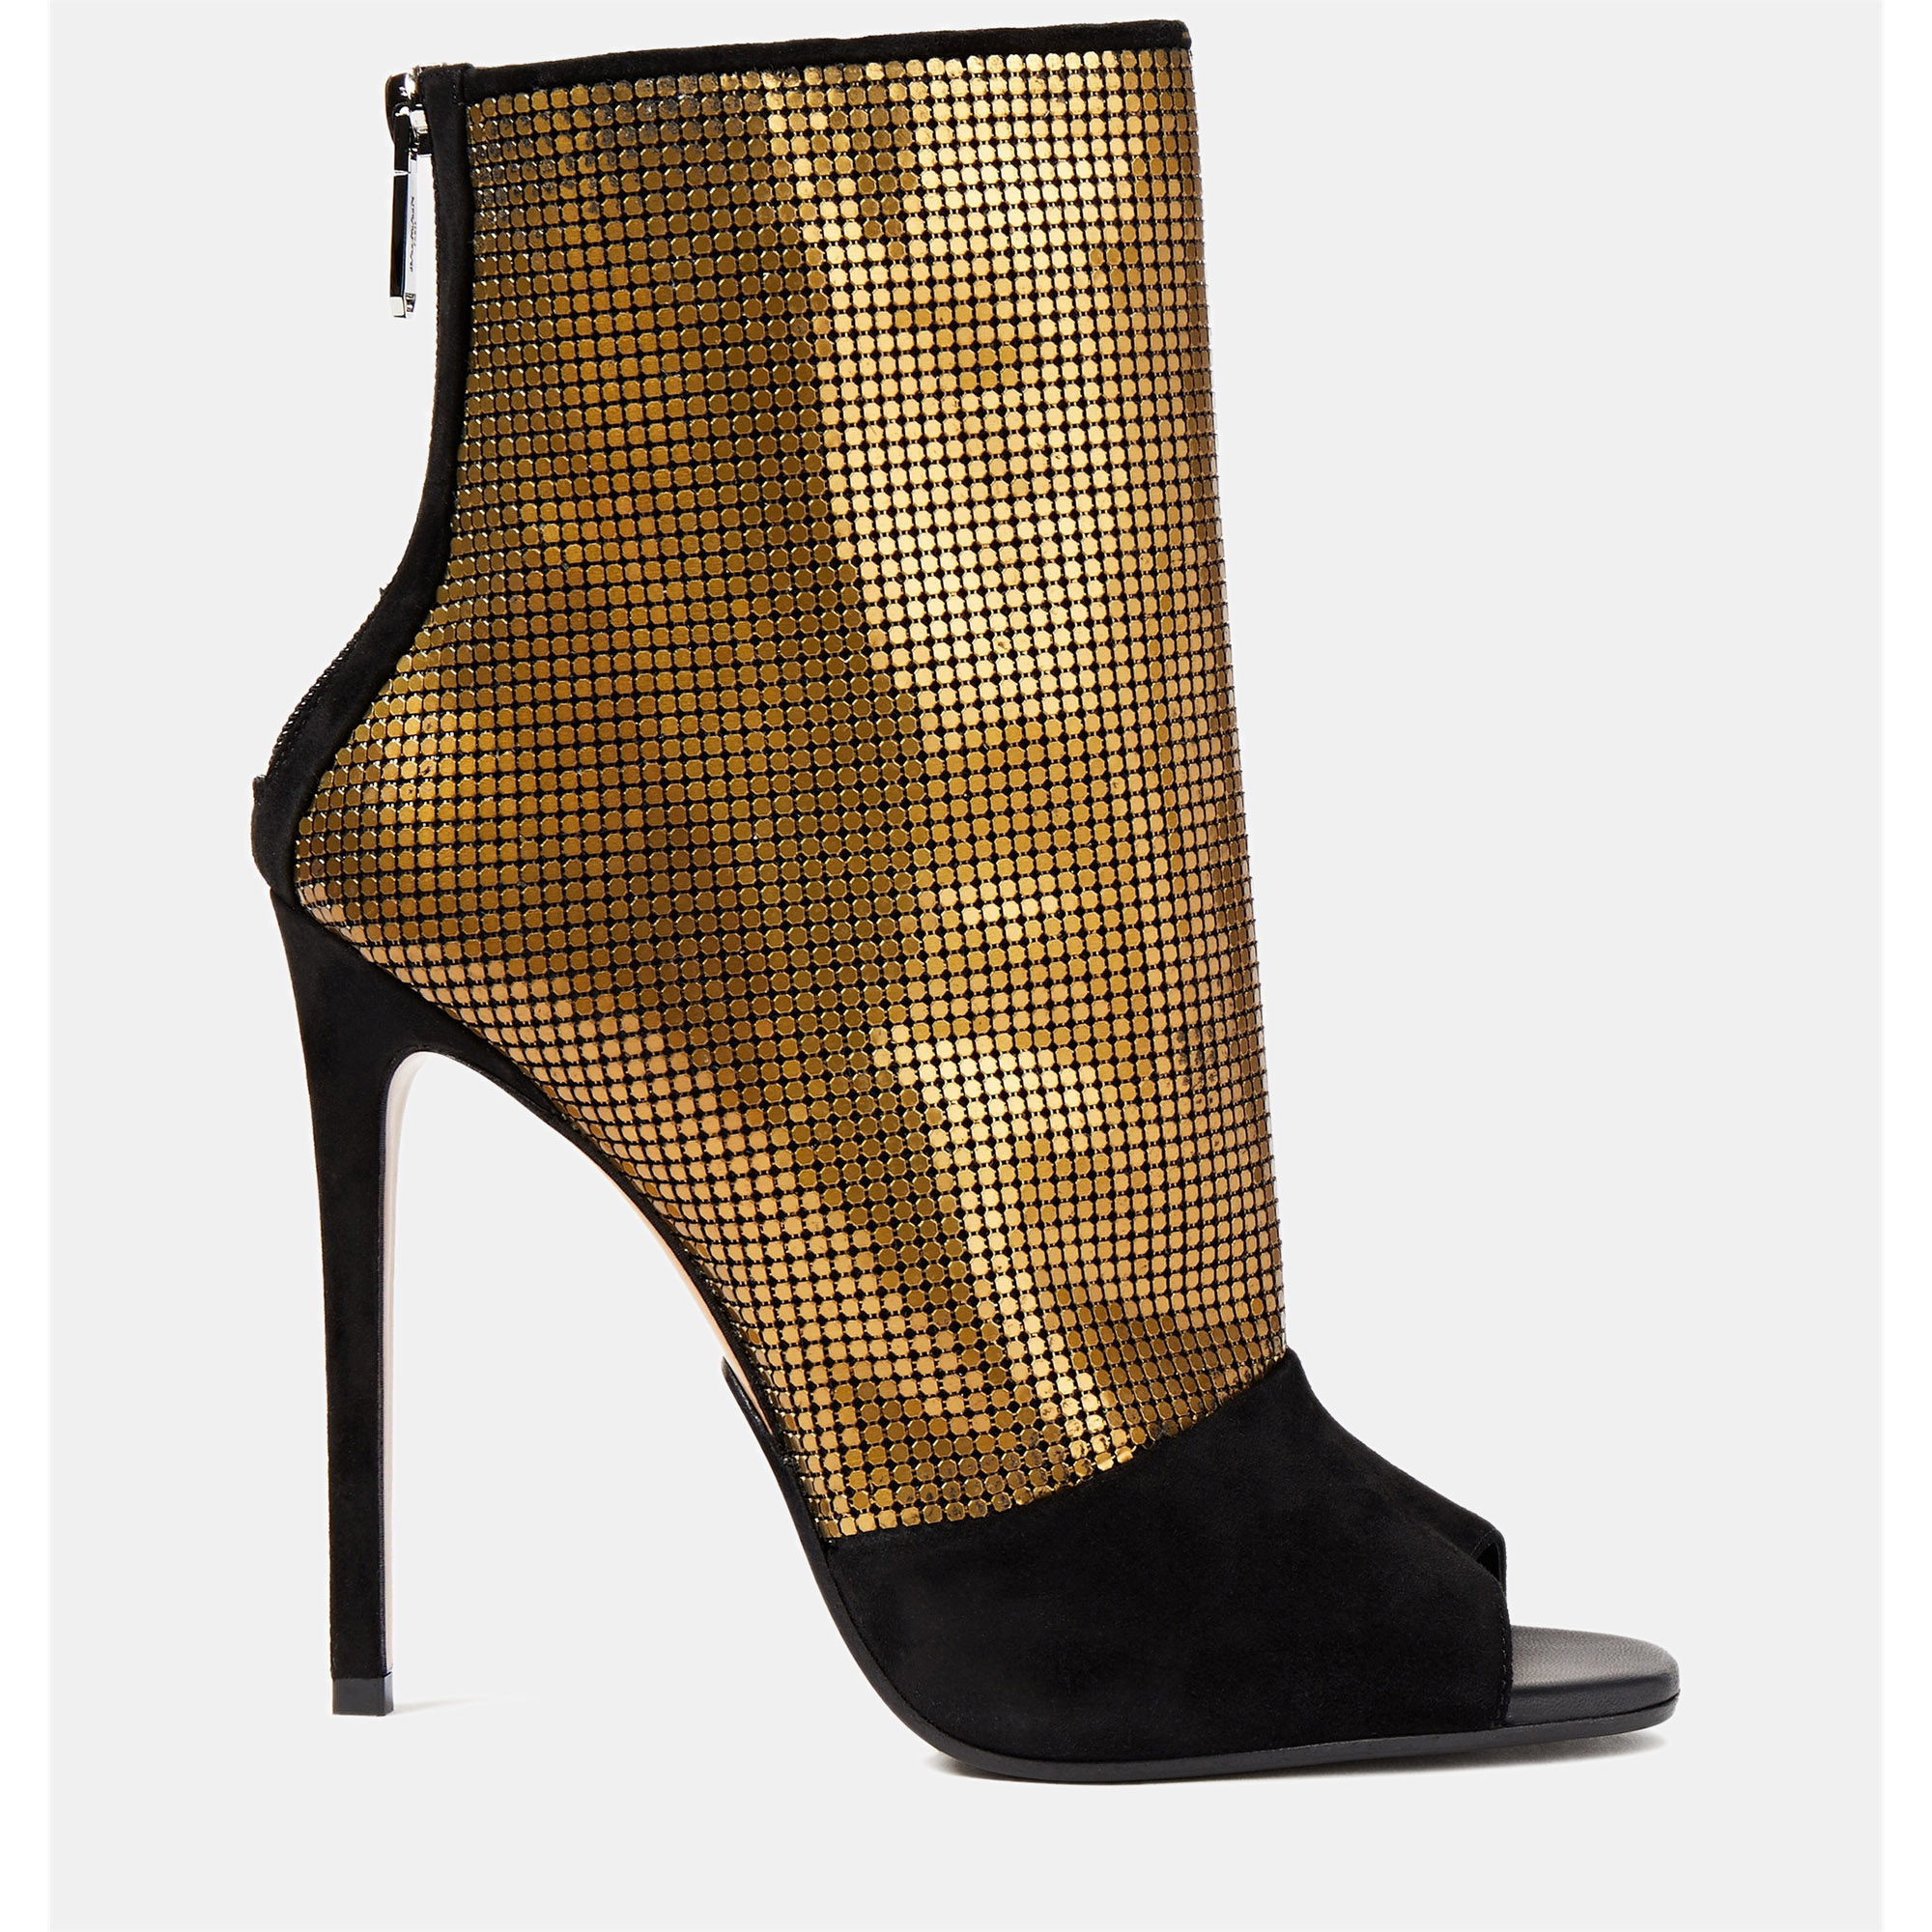 Balmain suede and chainmail peep toe ankle boots 38